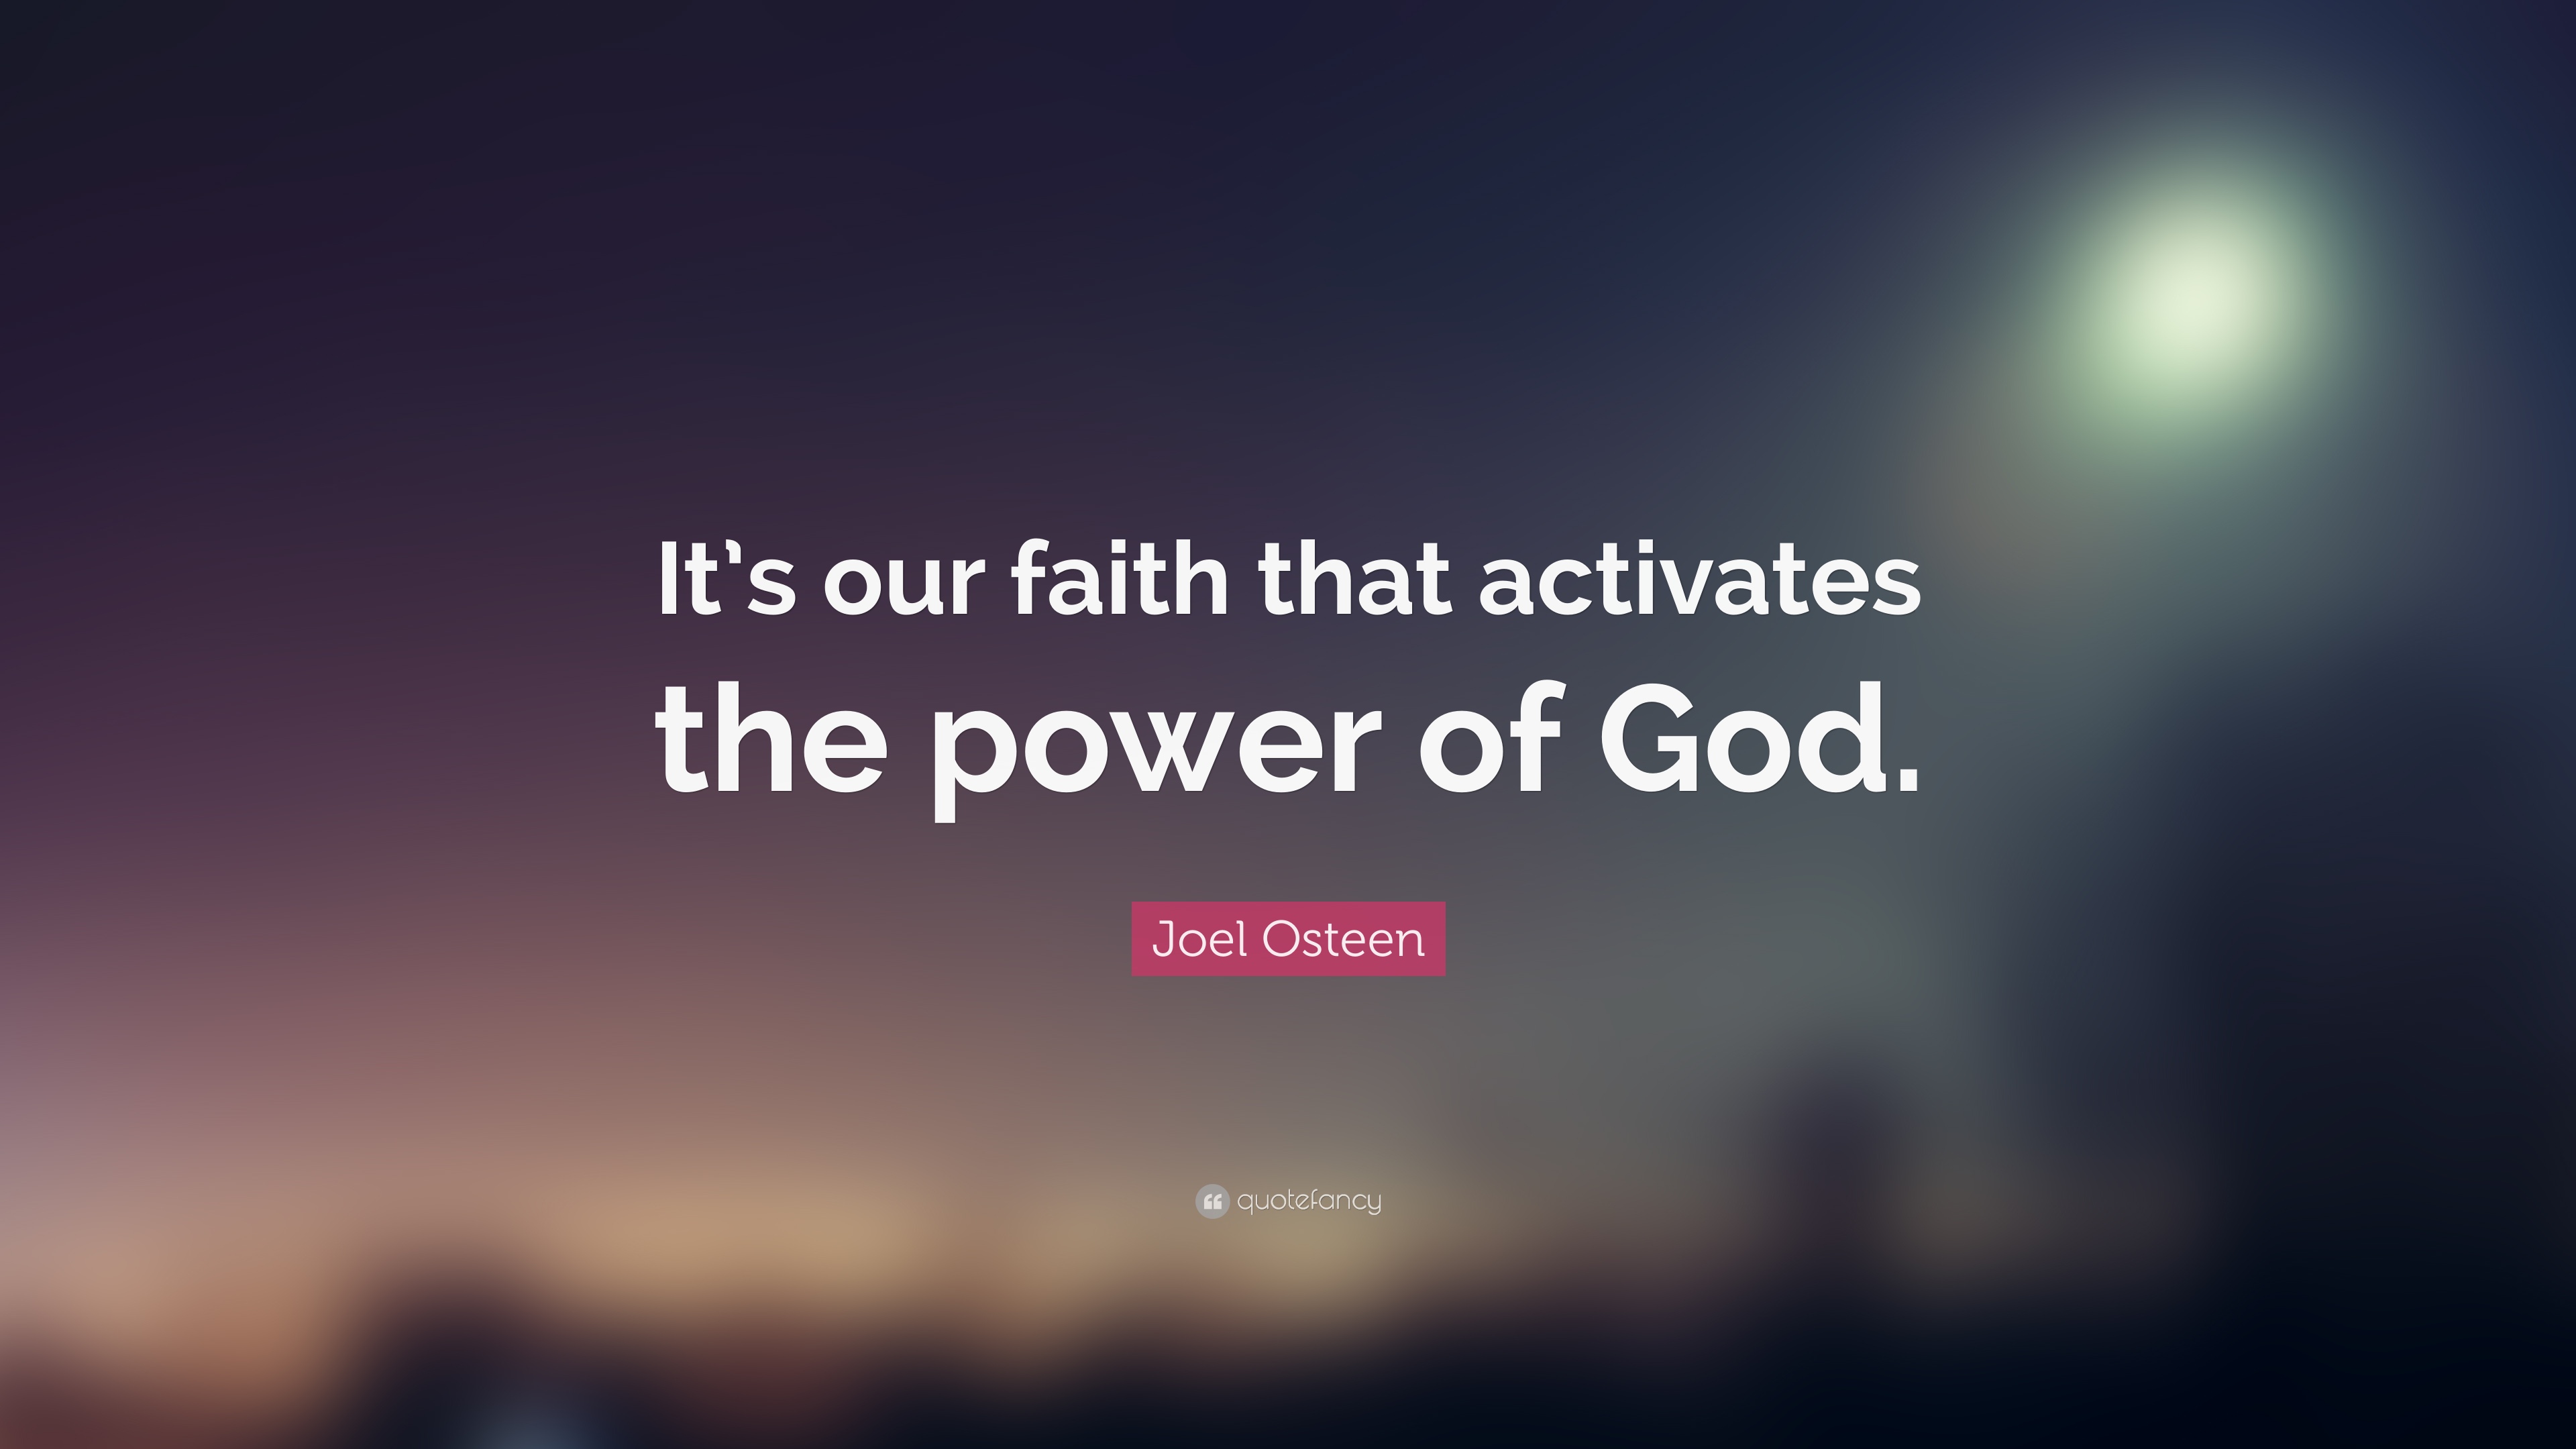 Joel Osteen Quote: “It's our faith that activates the power of God.”